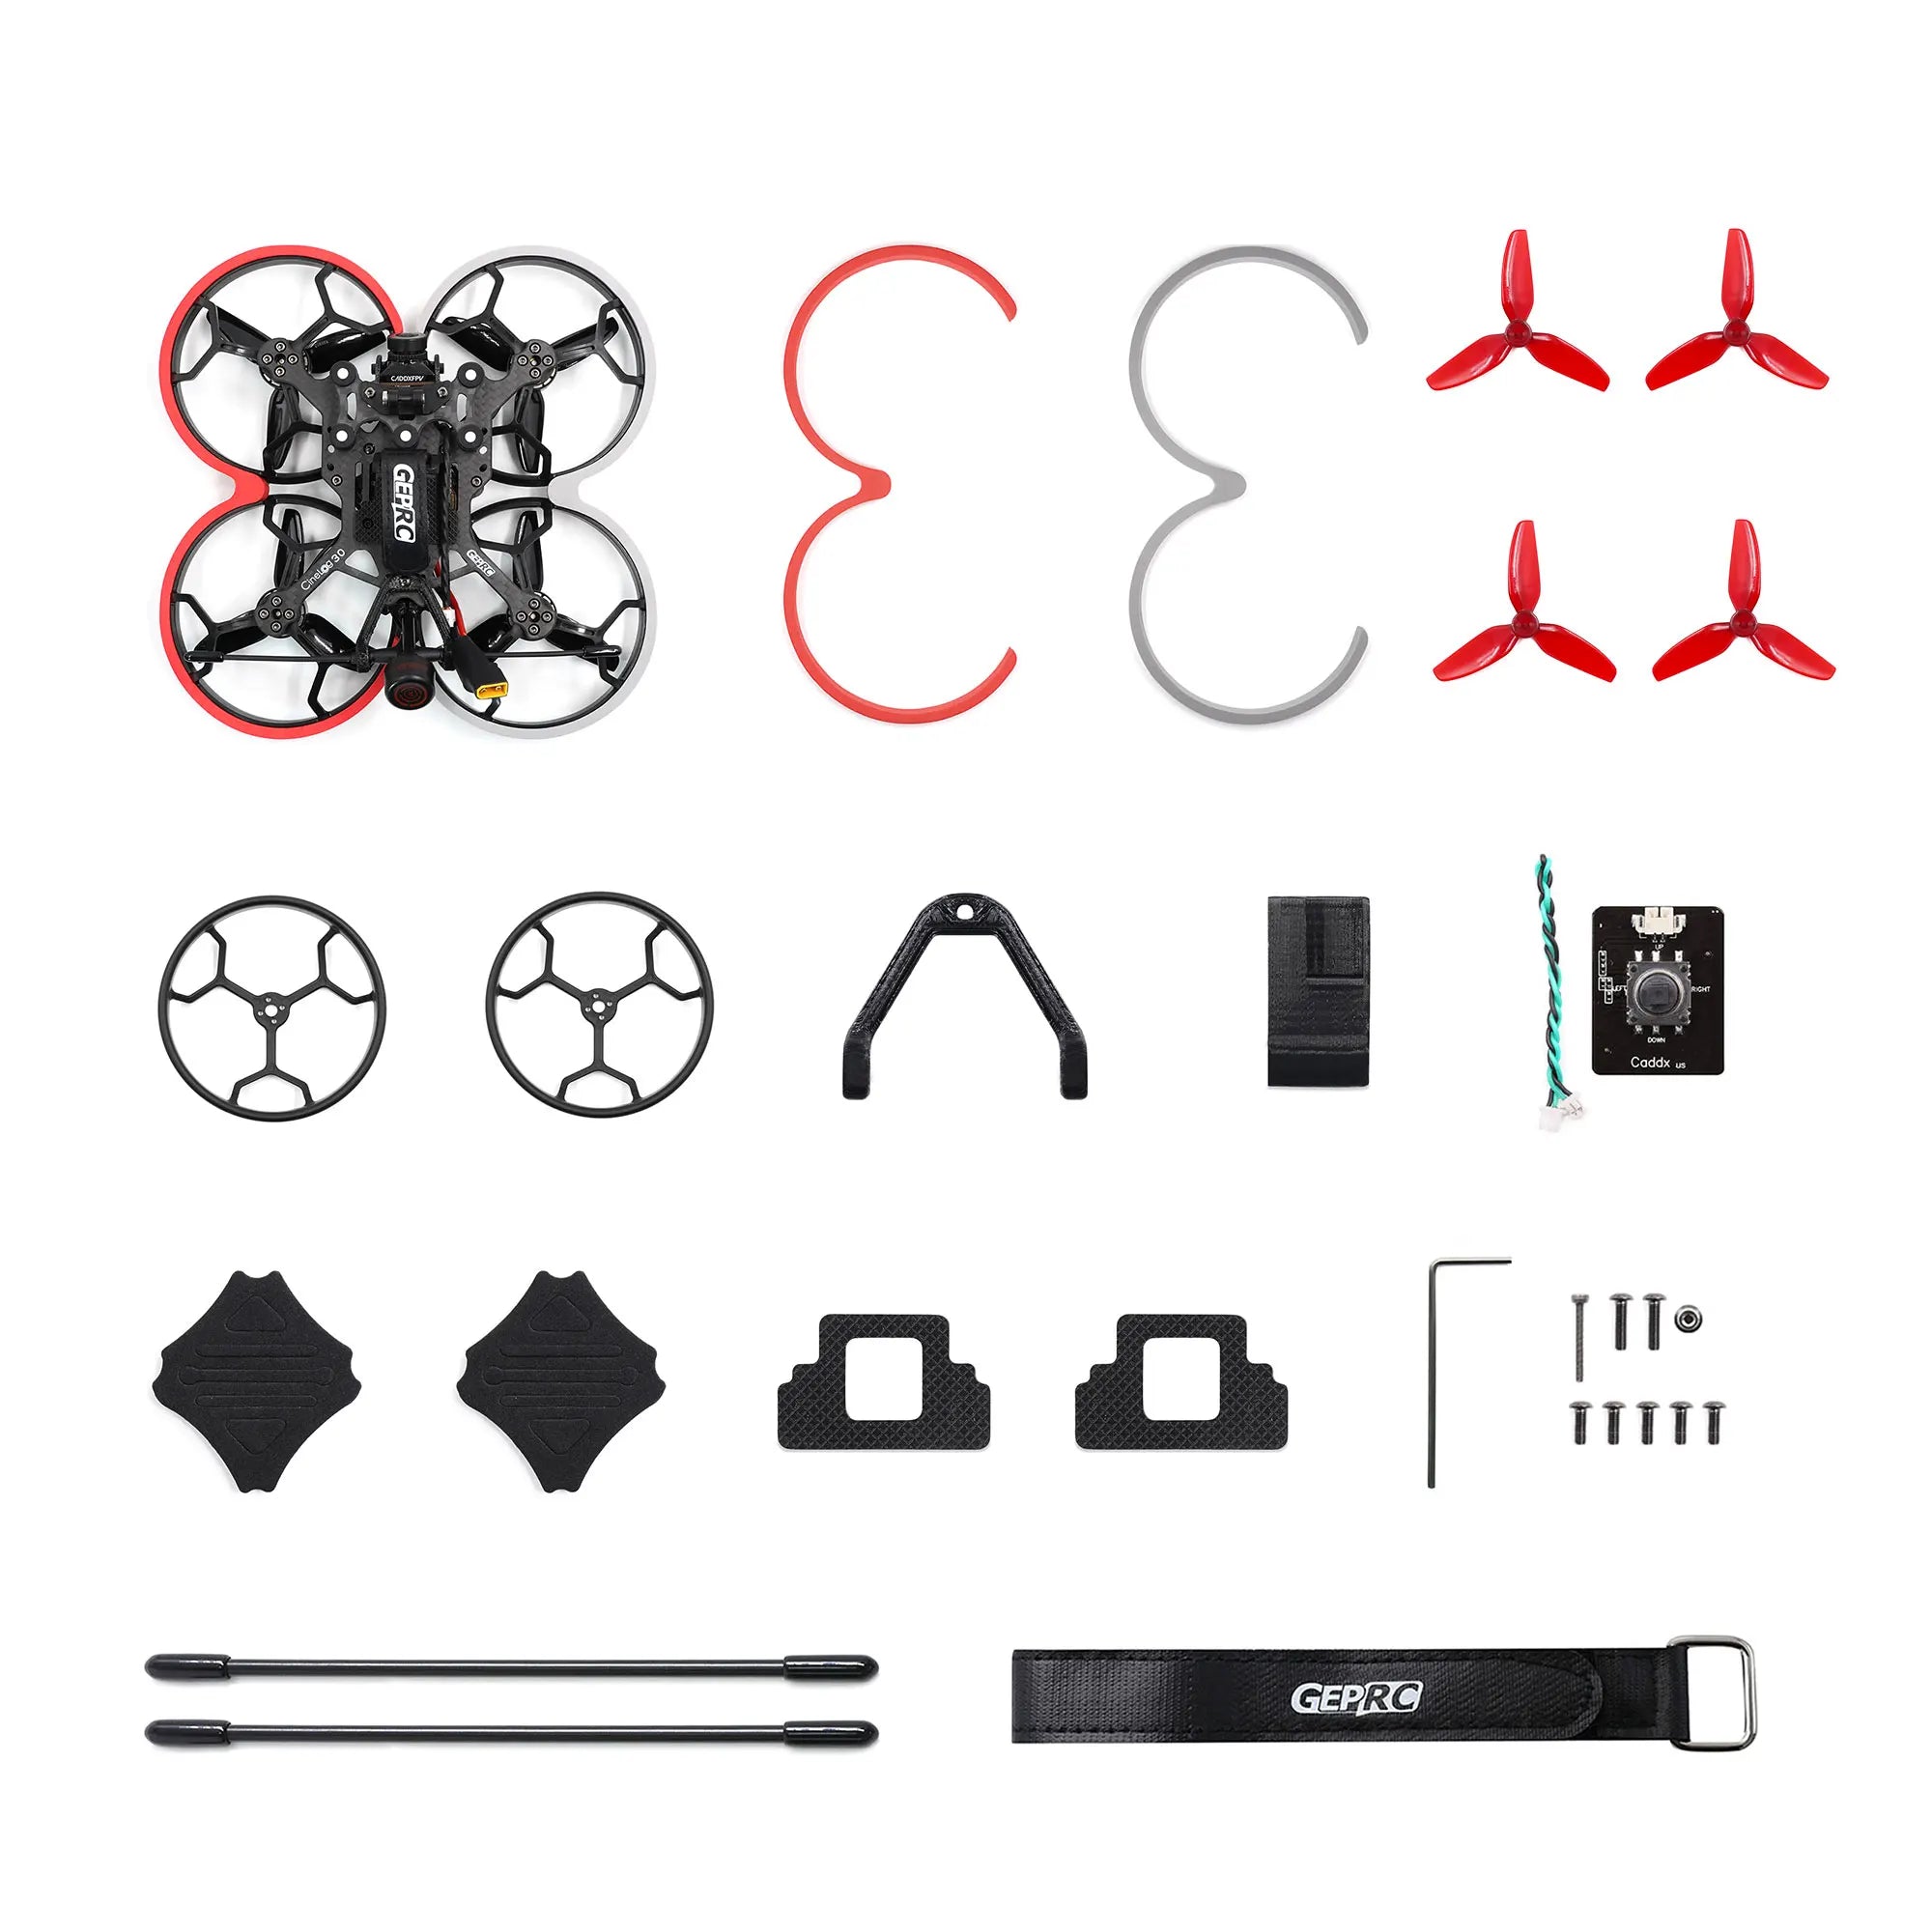 GEPRC CineLog30 Cinewhoop Drone, CineLog30 Analog provides a flight time of approximately 7-8 minutes when carrying a